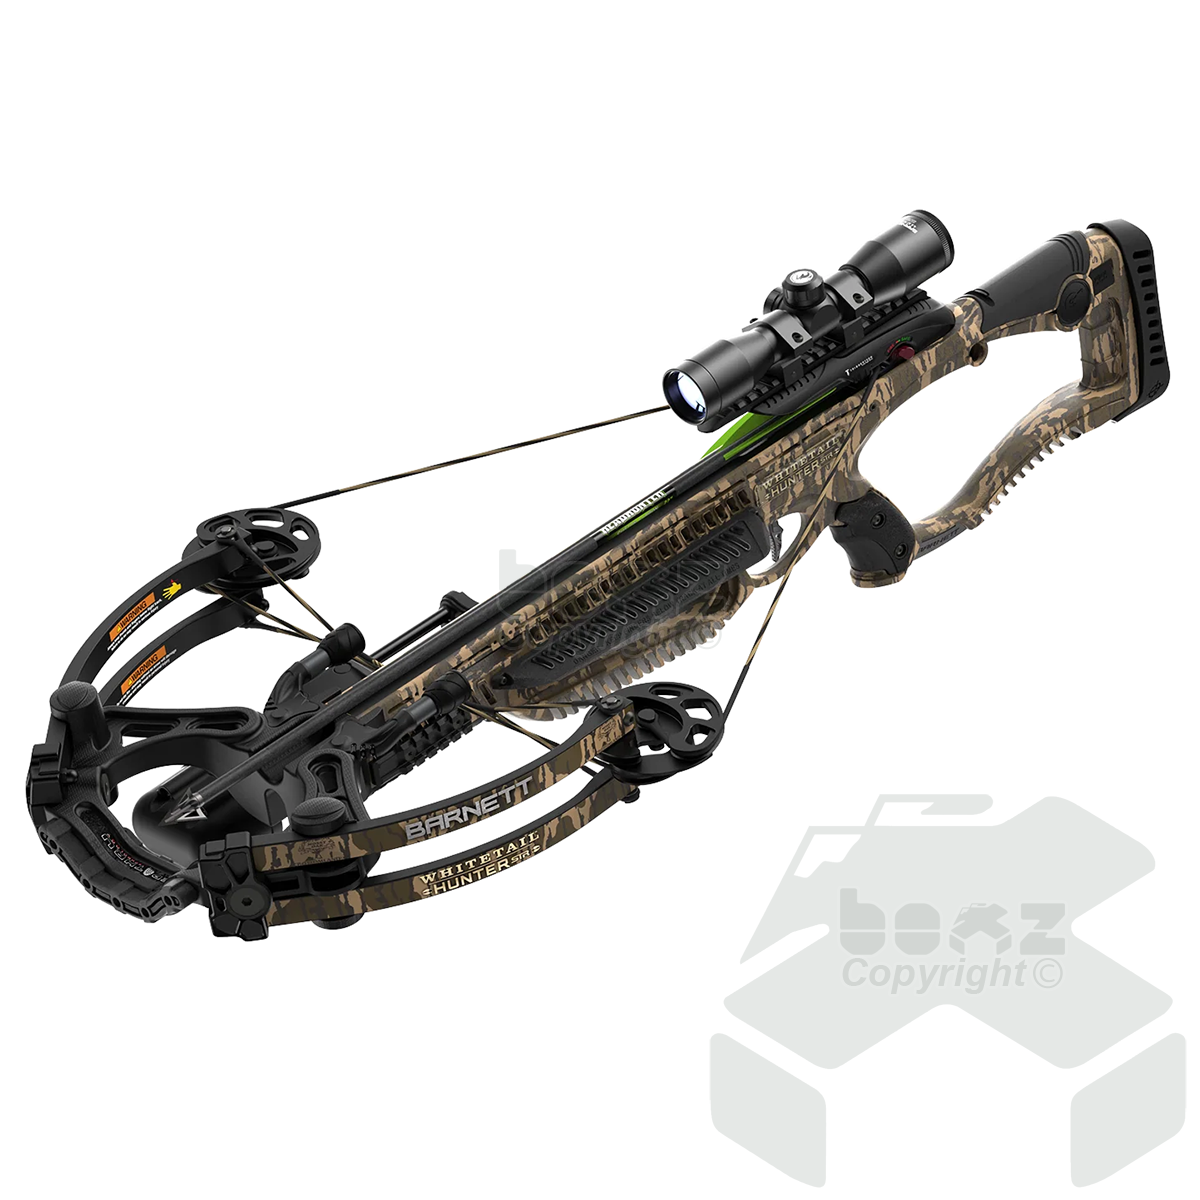 Barnett Whitetail Hunter STR Crossbow with CCD (Crank Cocking Device) - 187lbs